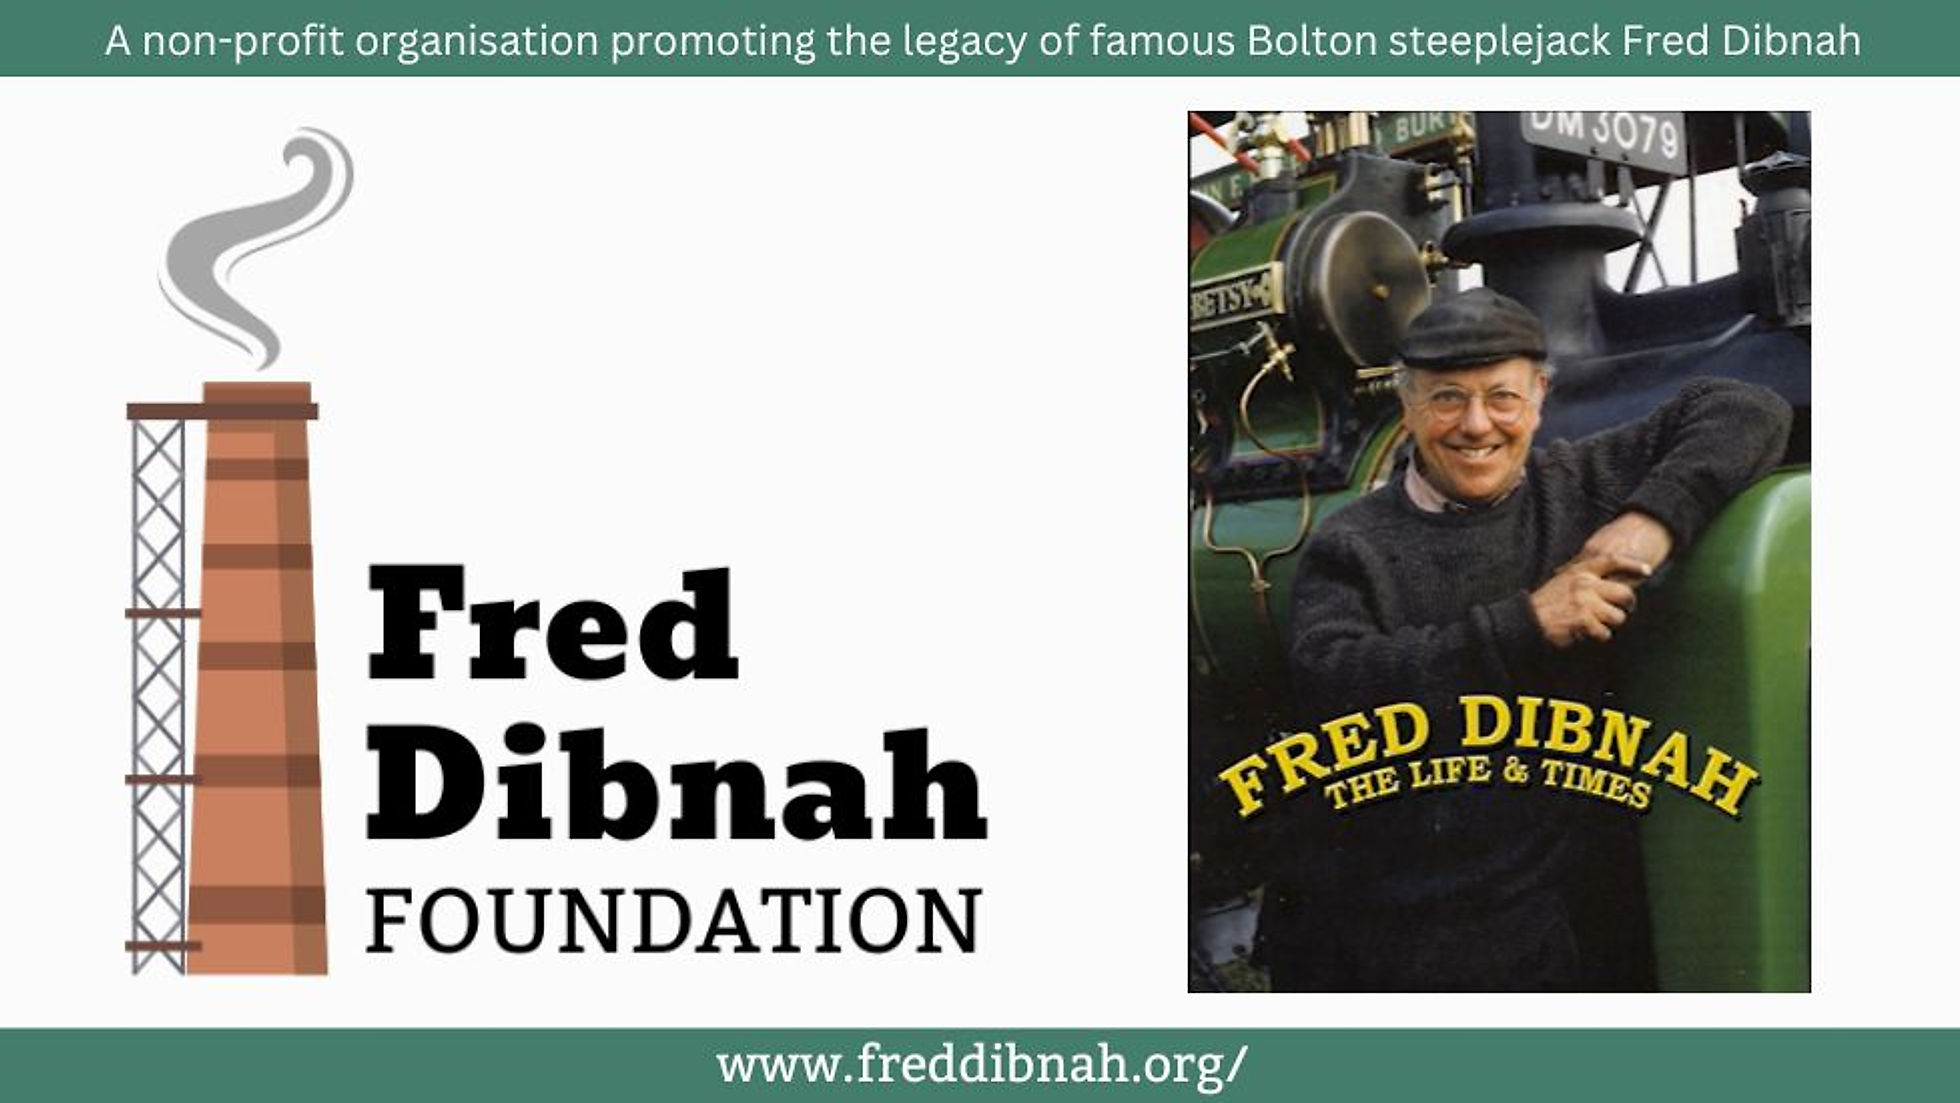 Fred Dibnah The Life and Times